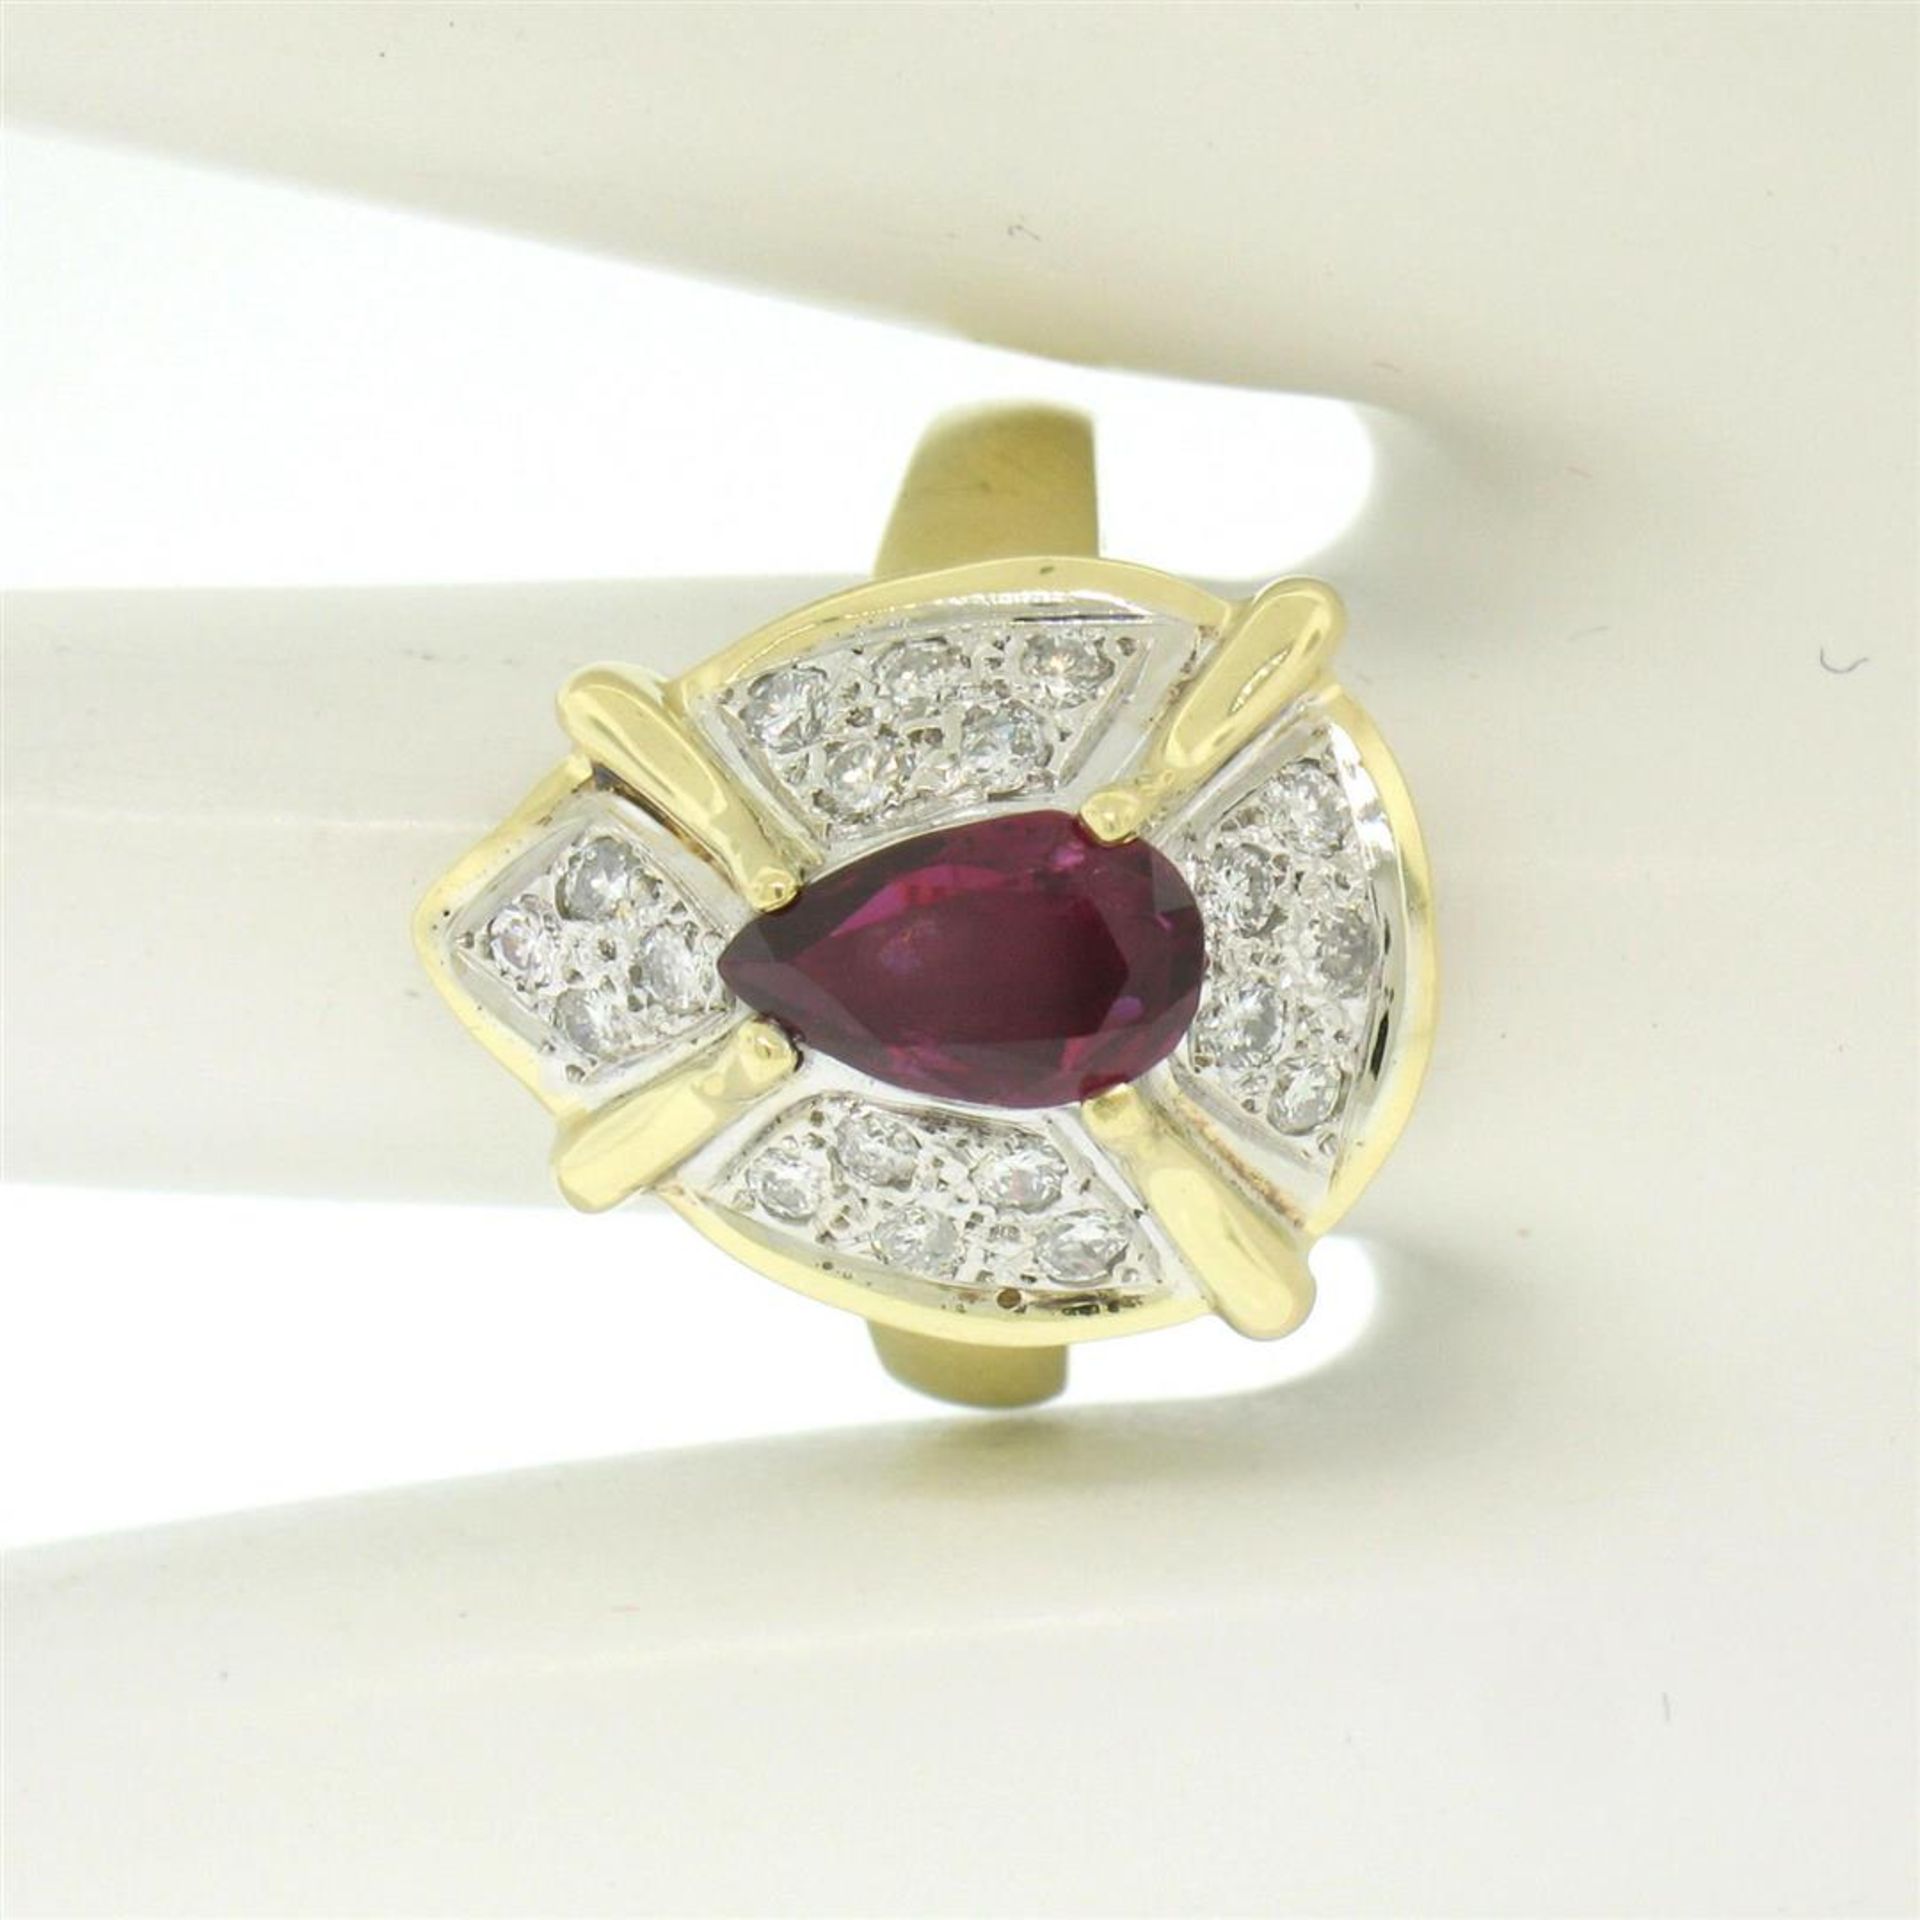 Vintage 18kt White and Yellow Gold 2.98ctw Ruby and Diamond Cocktail Ring - Image 5 of 9